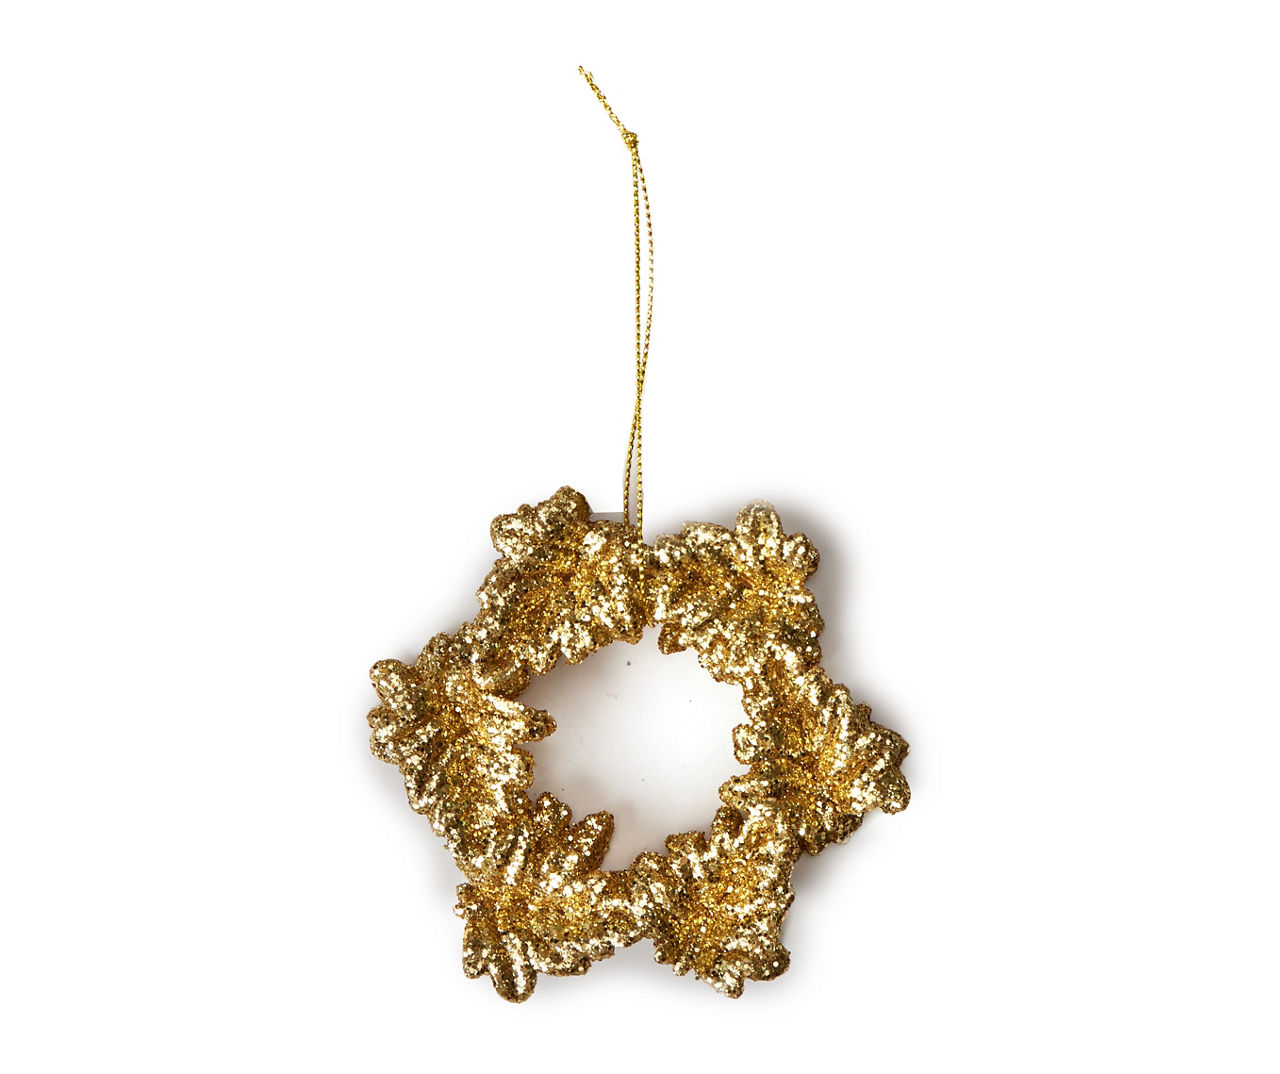 Gold Wreath Ornaments, 4-Pack